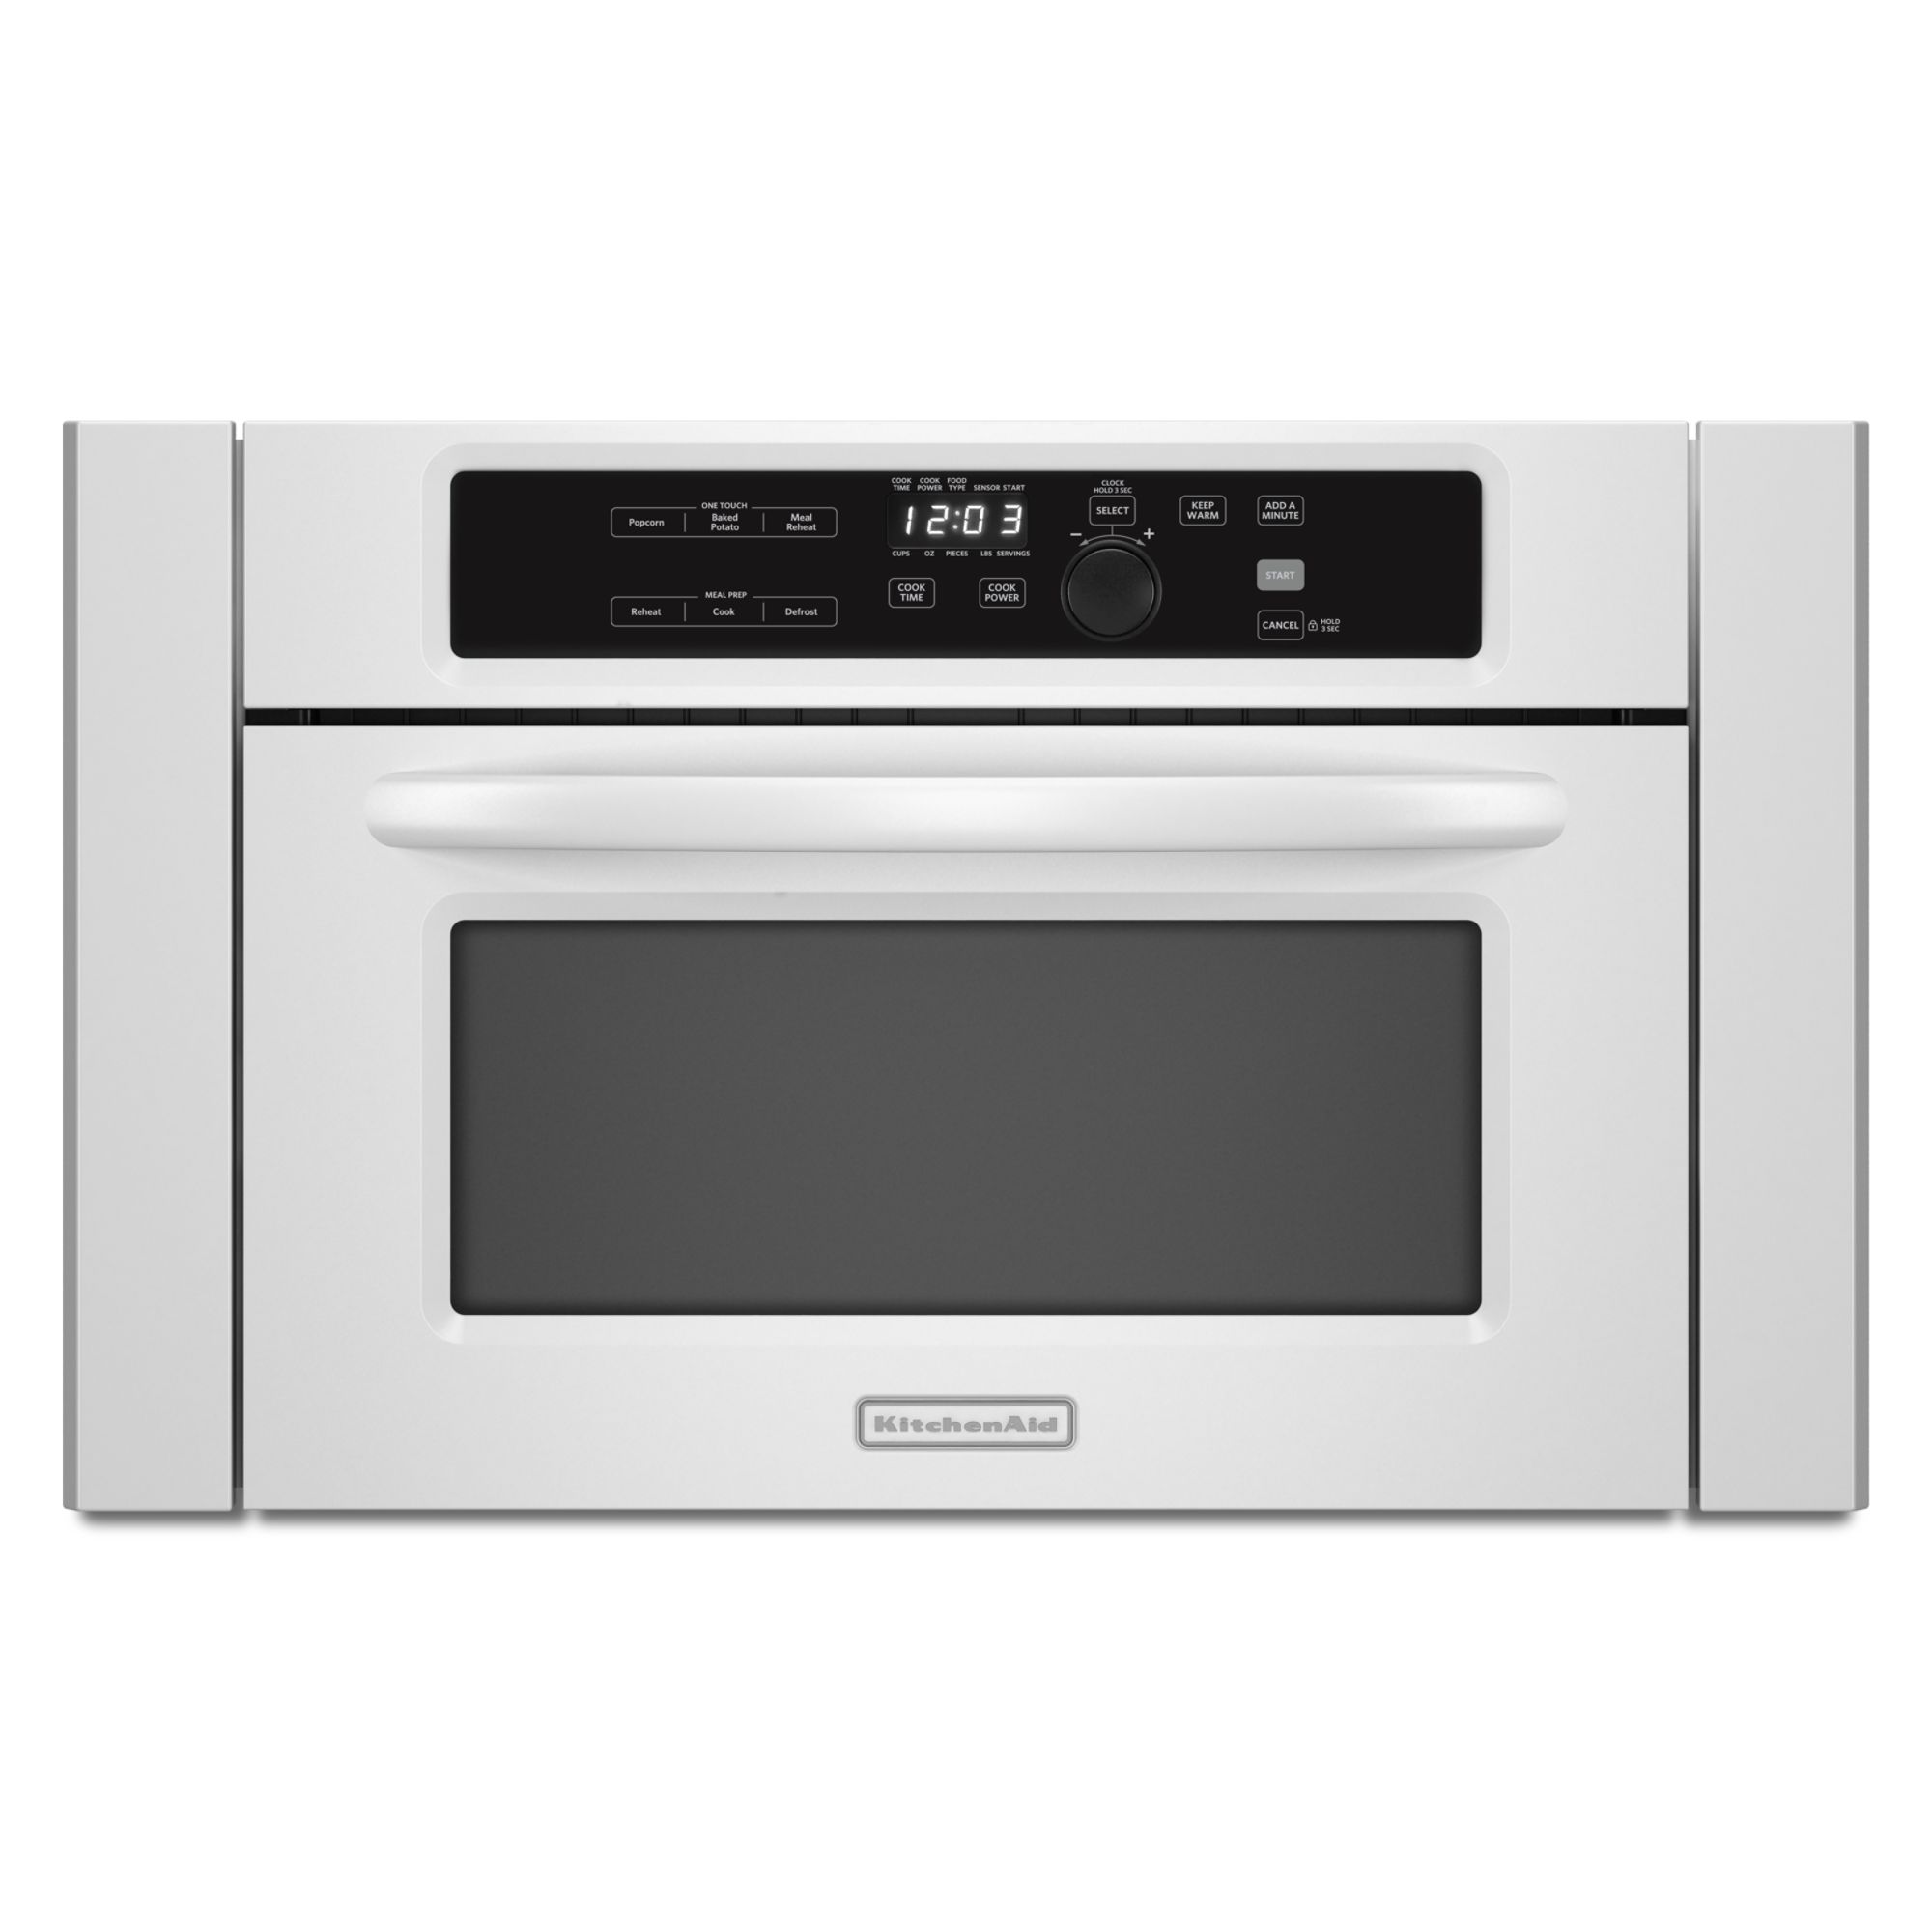 KitchenAid 24 Built-in Microwave Oven - White